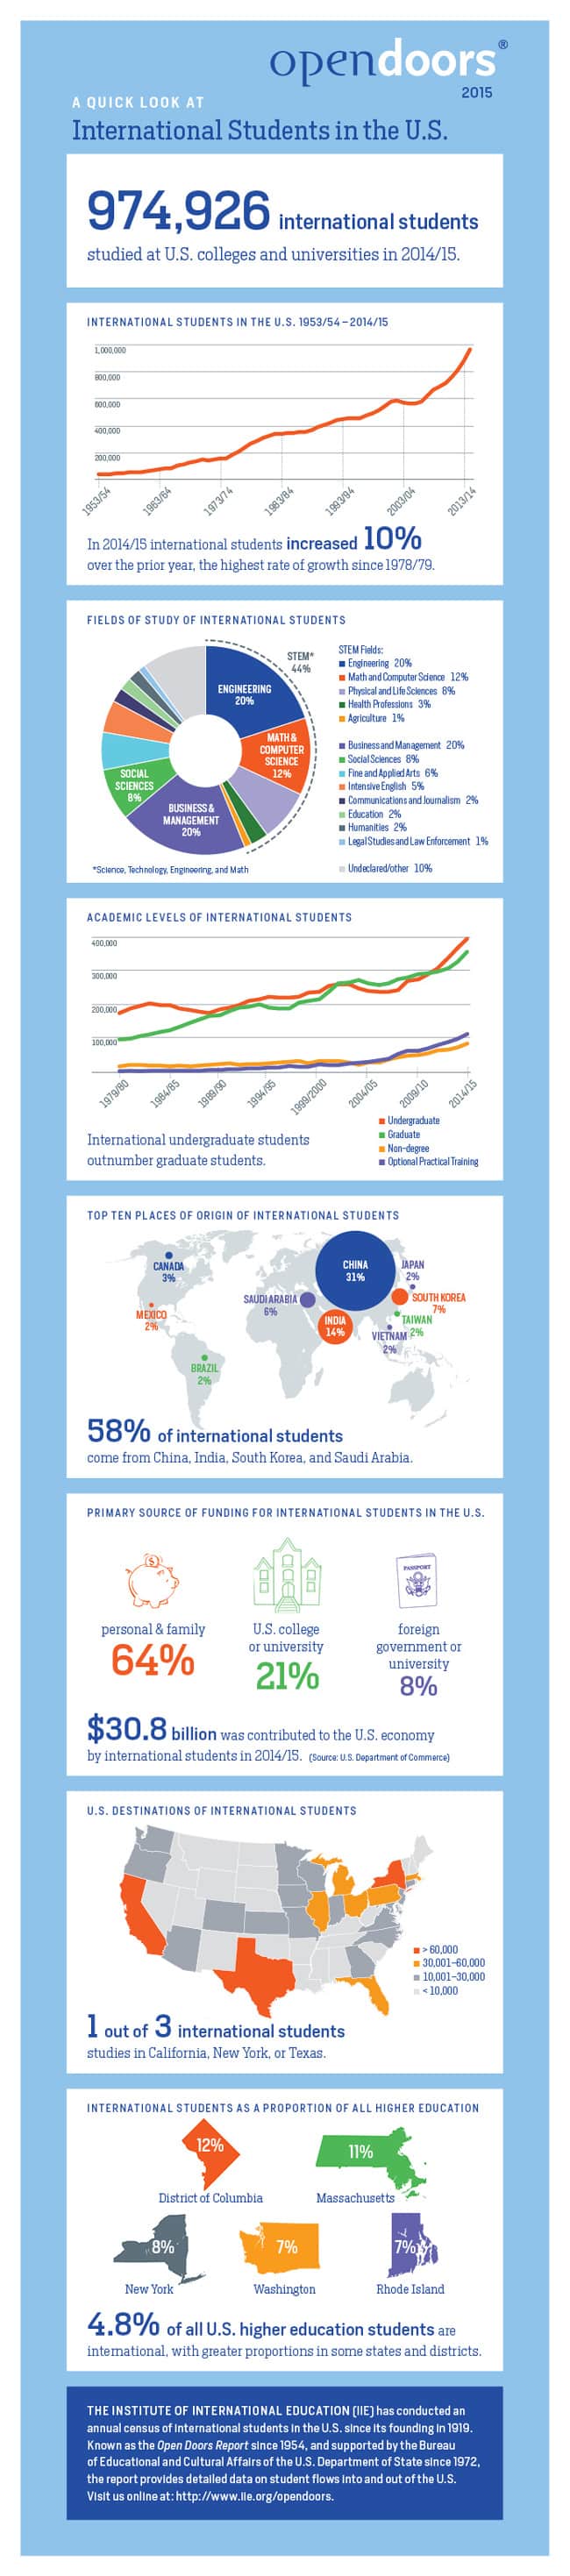 international-students-in-the-us